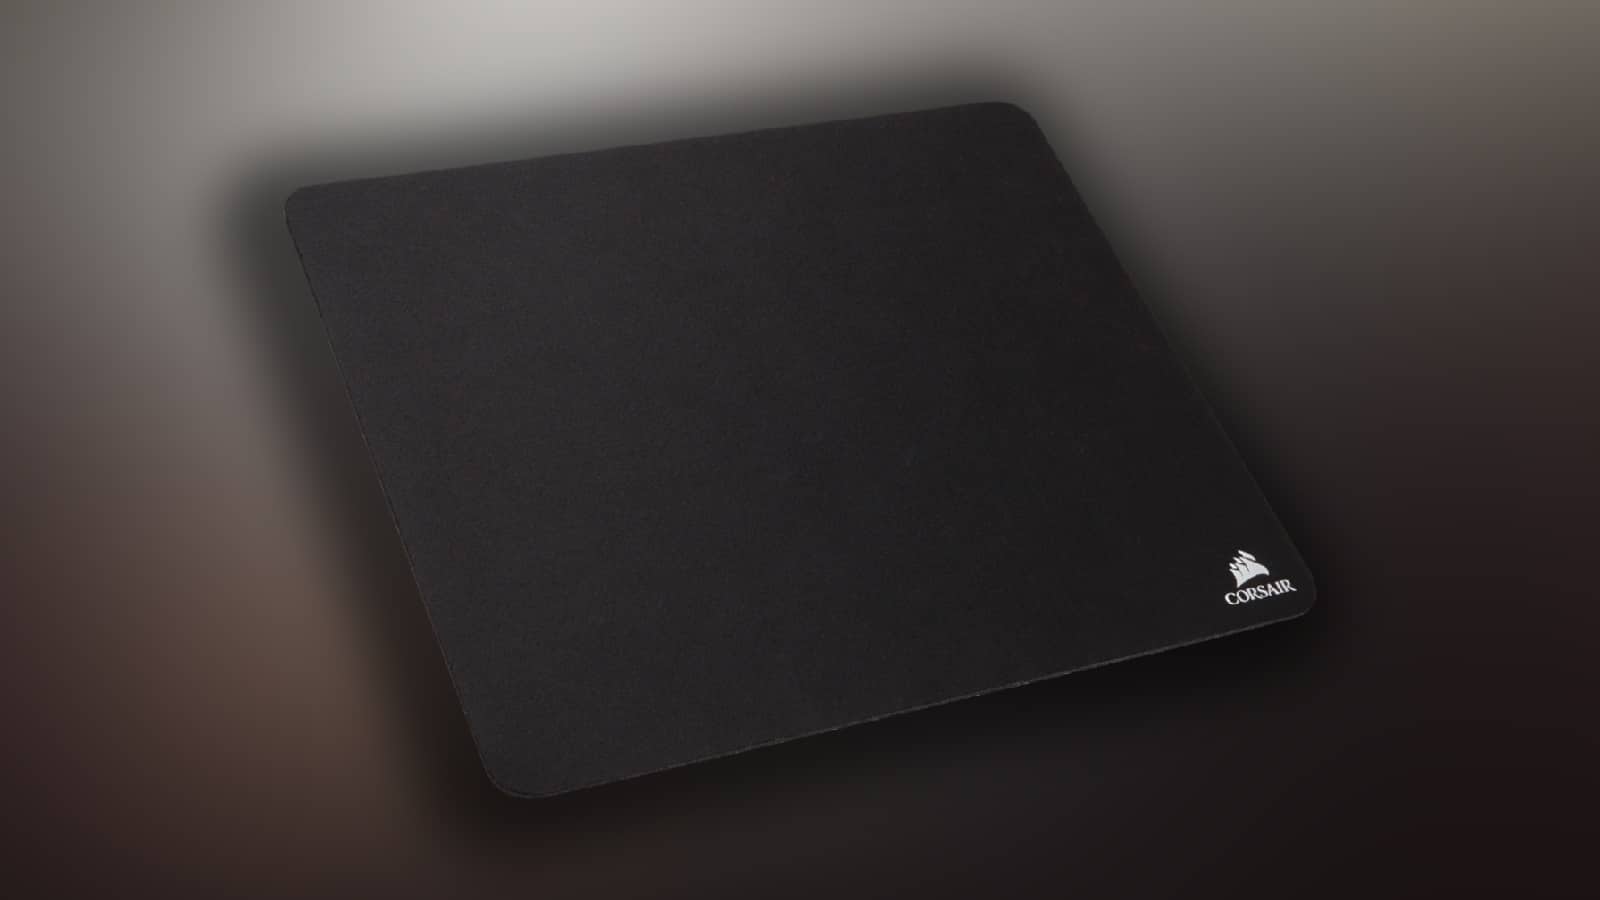 A mouse pad, which you can clean